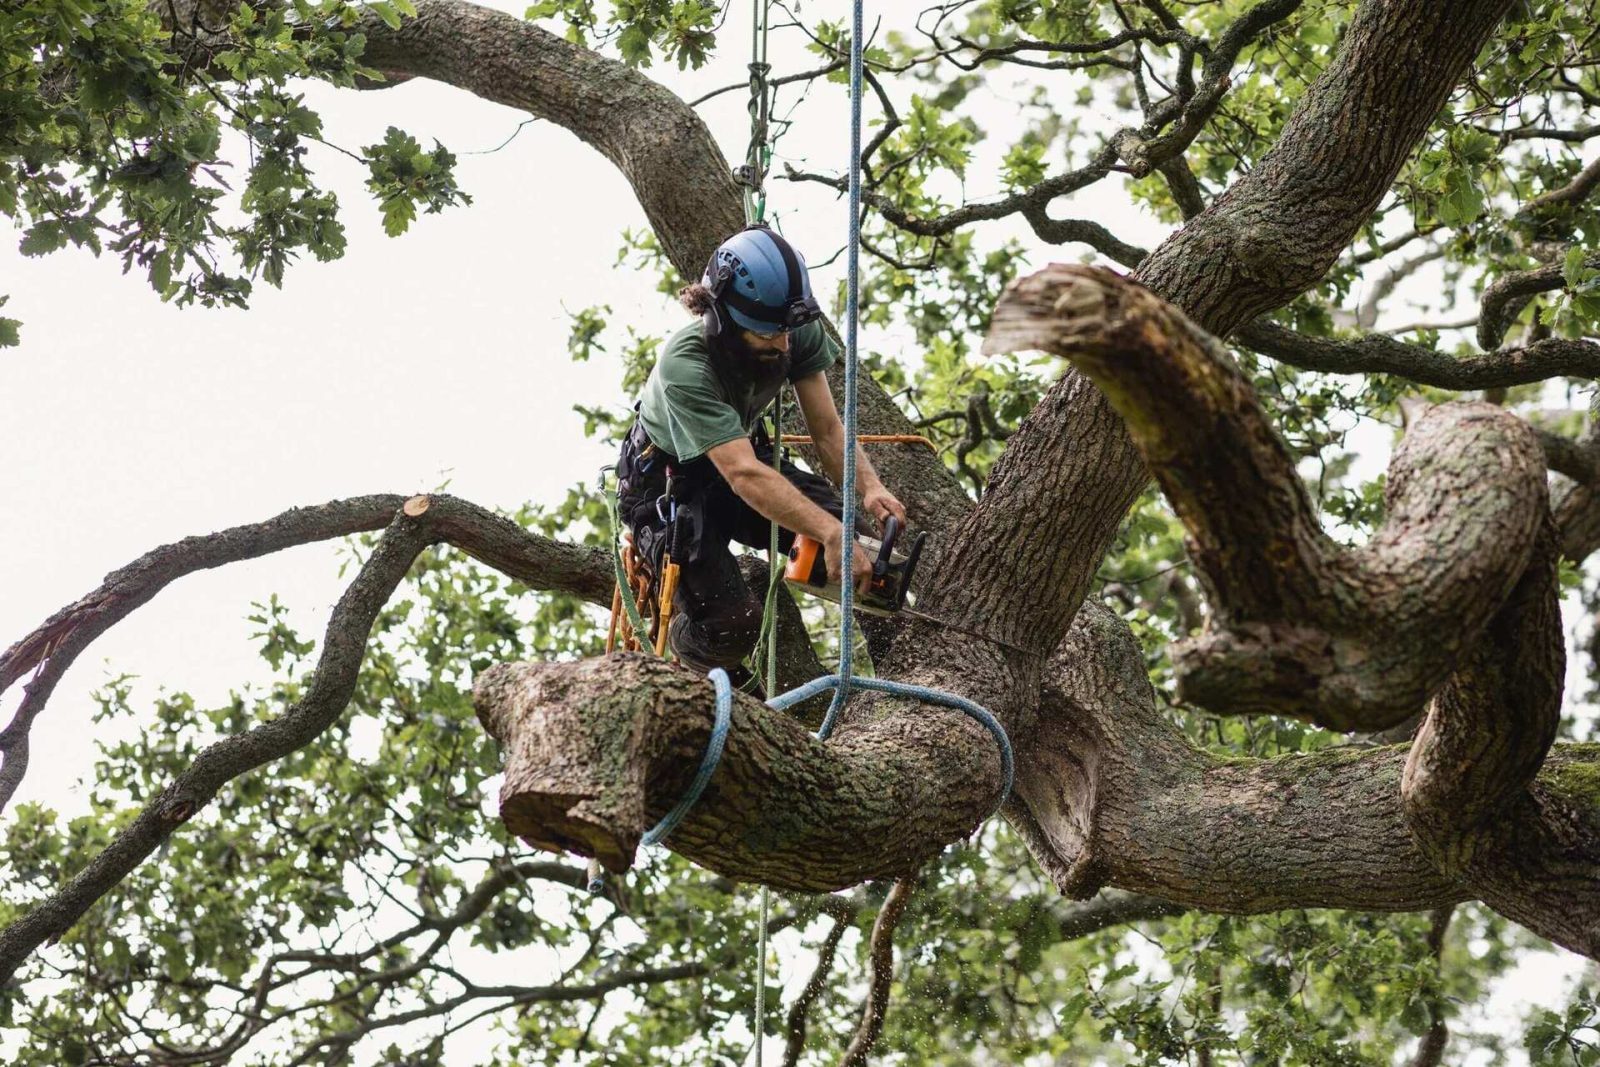 majestic tree care can offer tree felling services ensuring saftey to property owners and the public